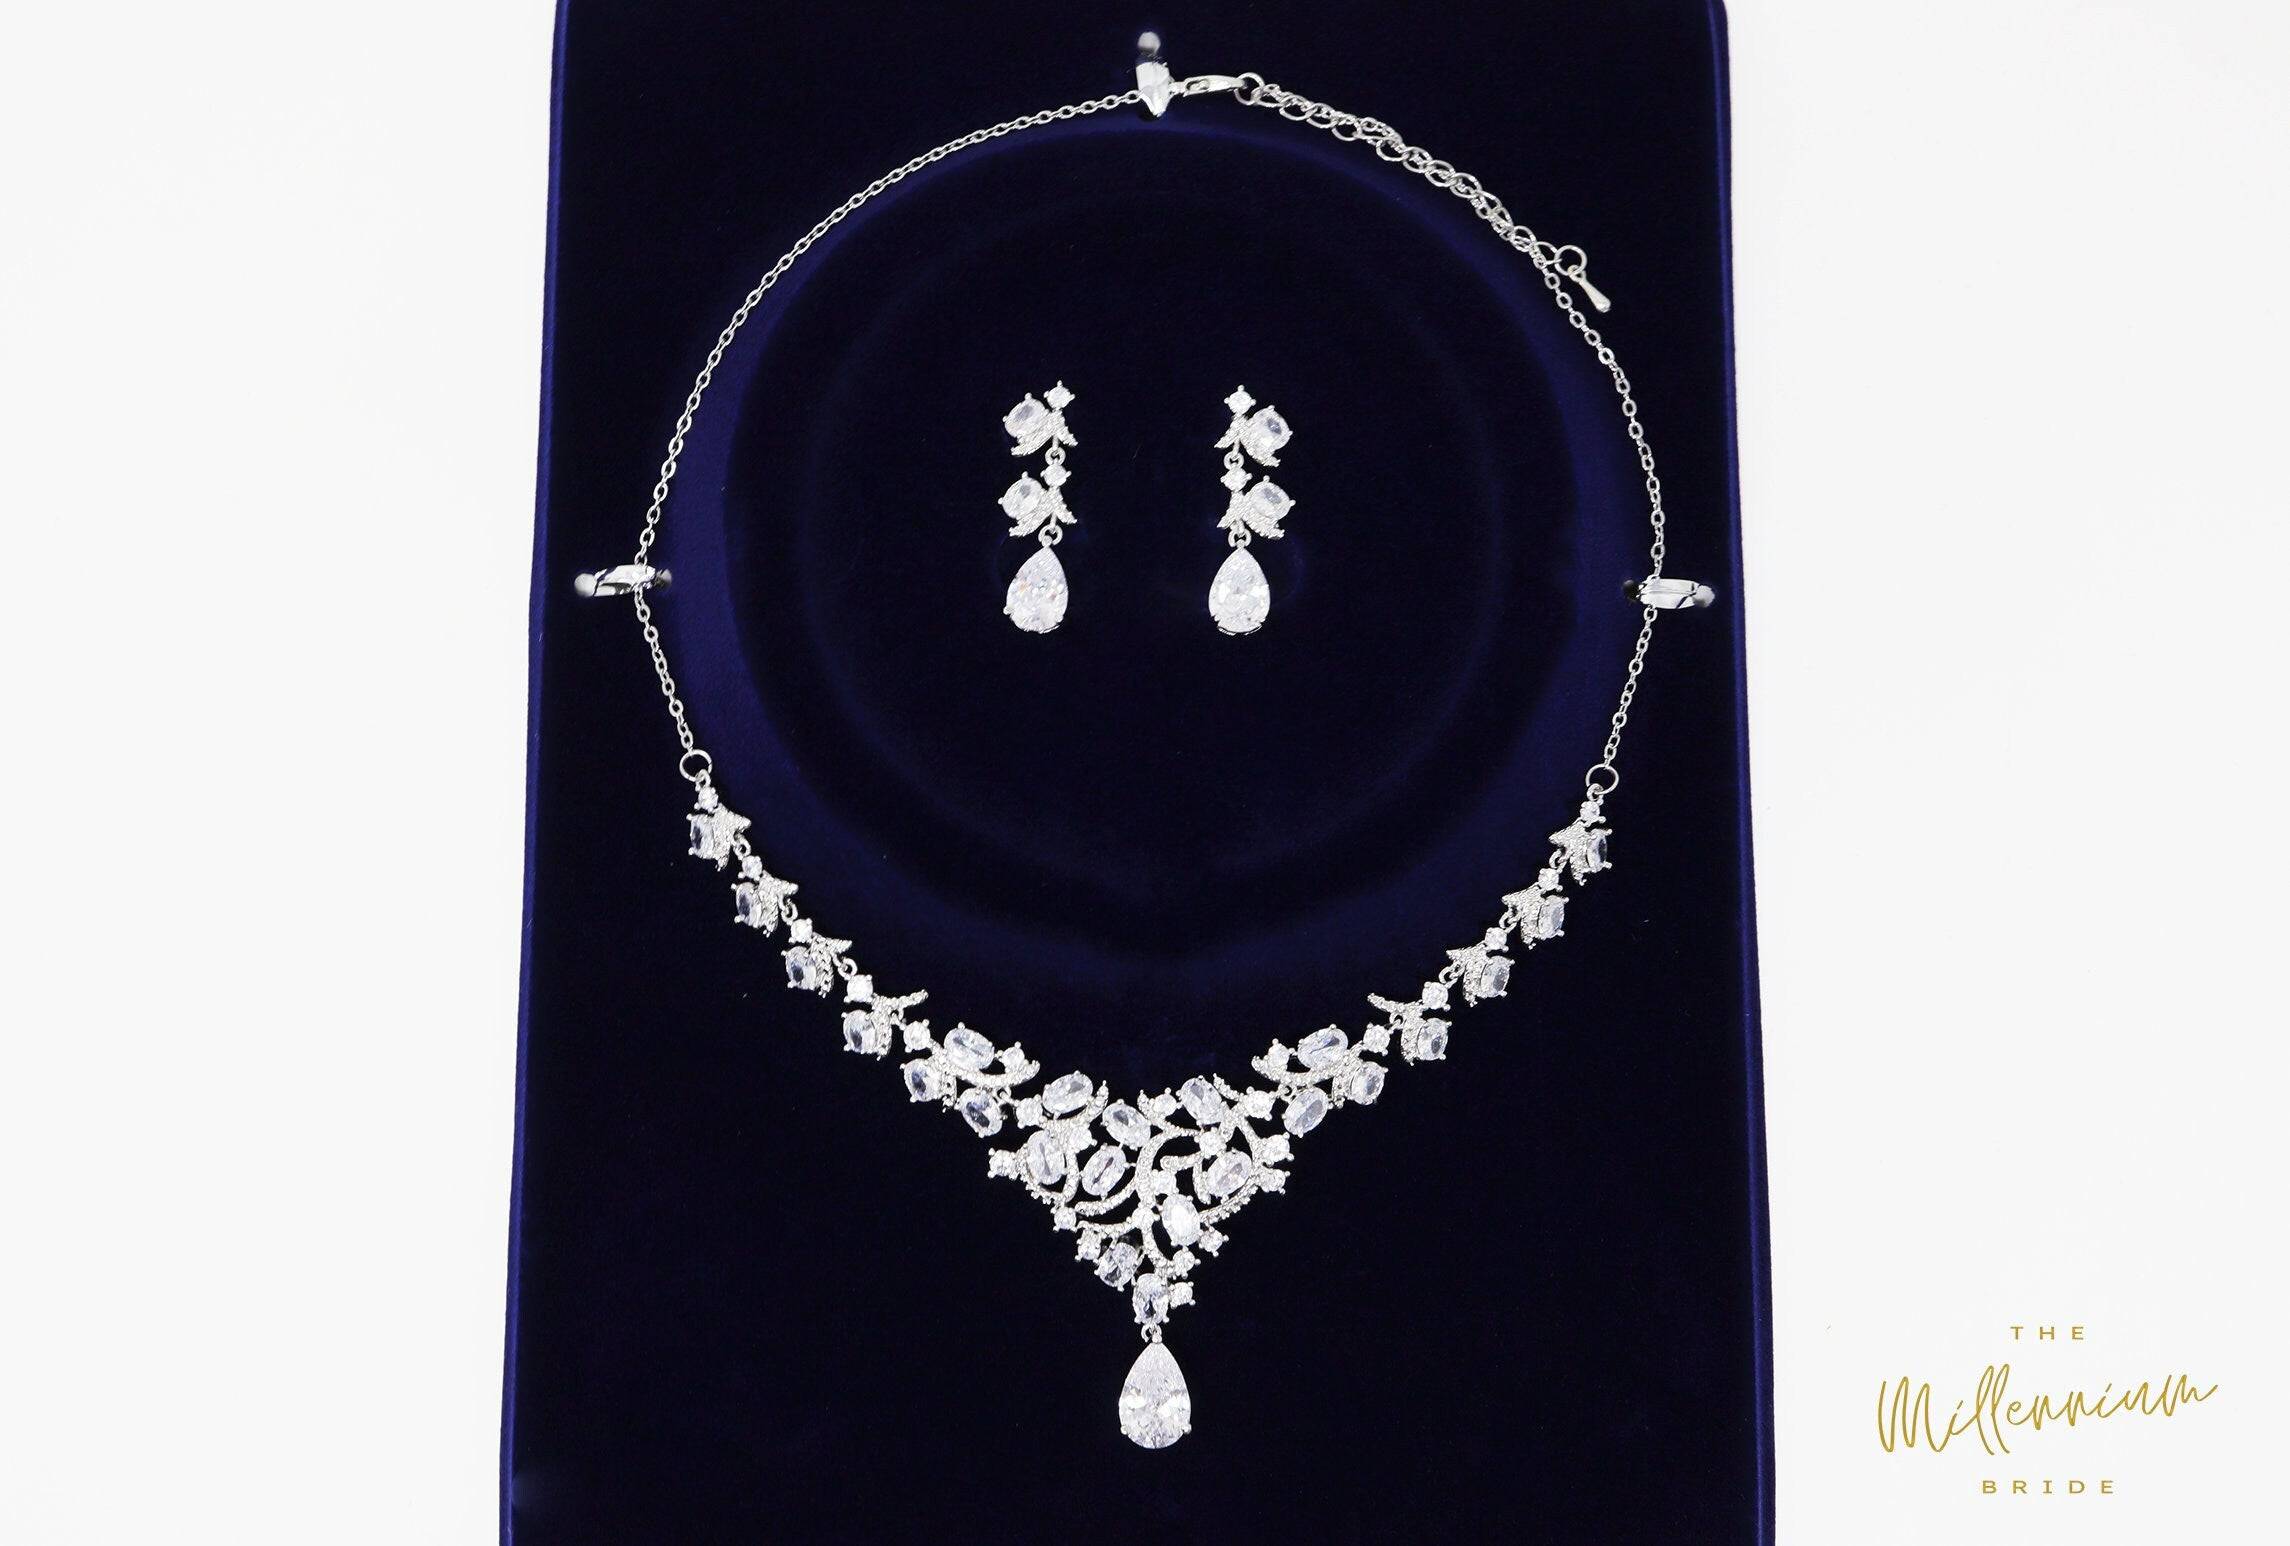 Swarovski Crystal Bridal V Drop Necklace , Long Bridal Jewelry, Bridal Earrings and Necklace, Statement Earrings CZ Necklace Set.